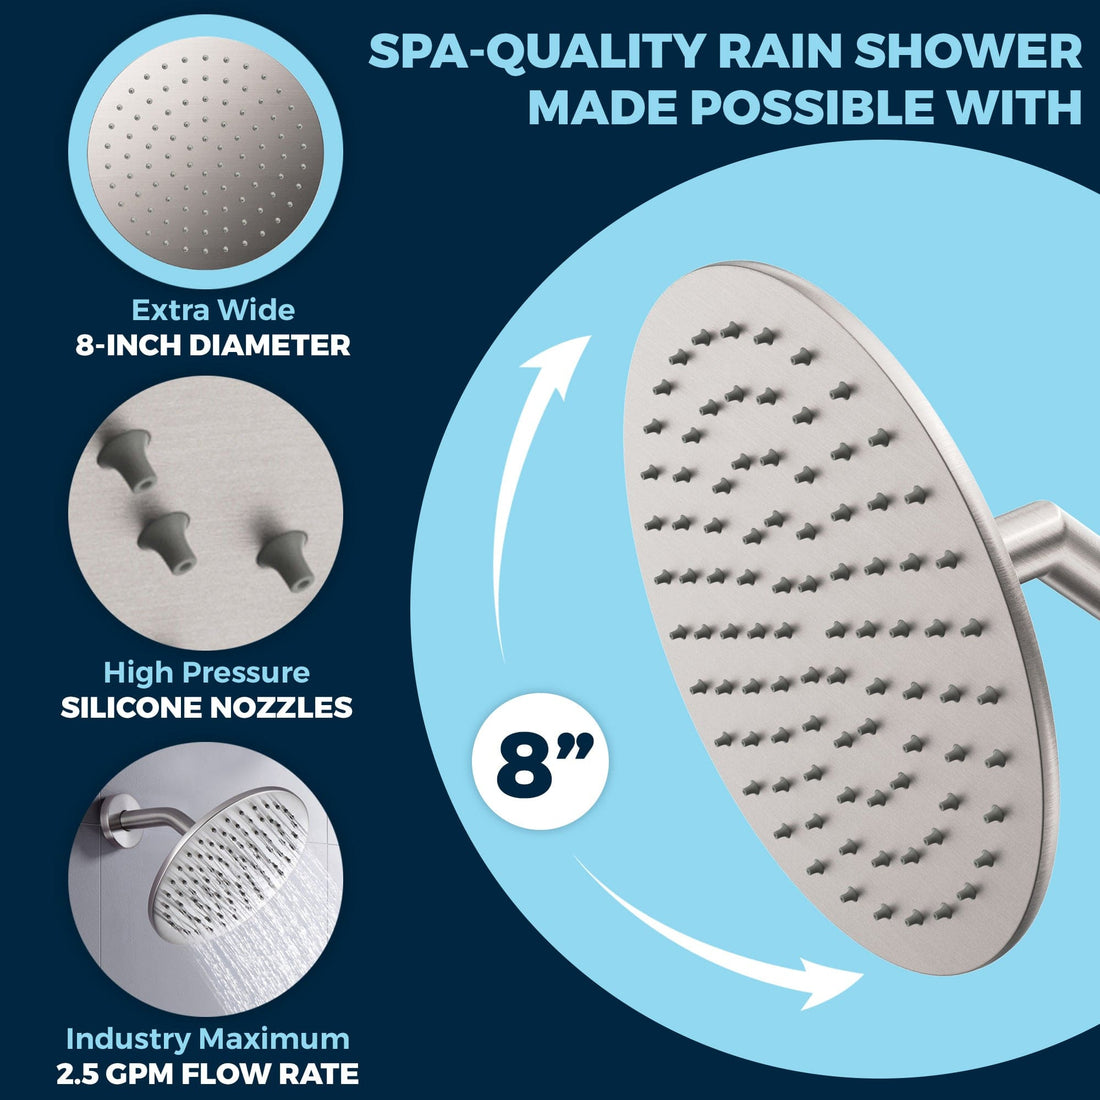 Optimized Pressure Brushed Nickel ALL METAL 8 Inch Rainfall Shower Head - Shower Head Rainfall - 2.5 GPM High Flow Shower Head Optimized for Pressure – Large Round Rain Shower Heads - Wall, Overhead, or Ceiling Mount - The Shower Head Store